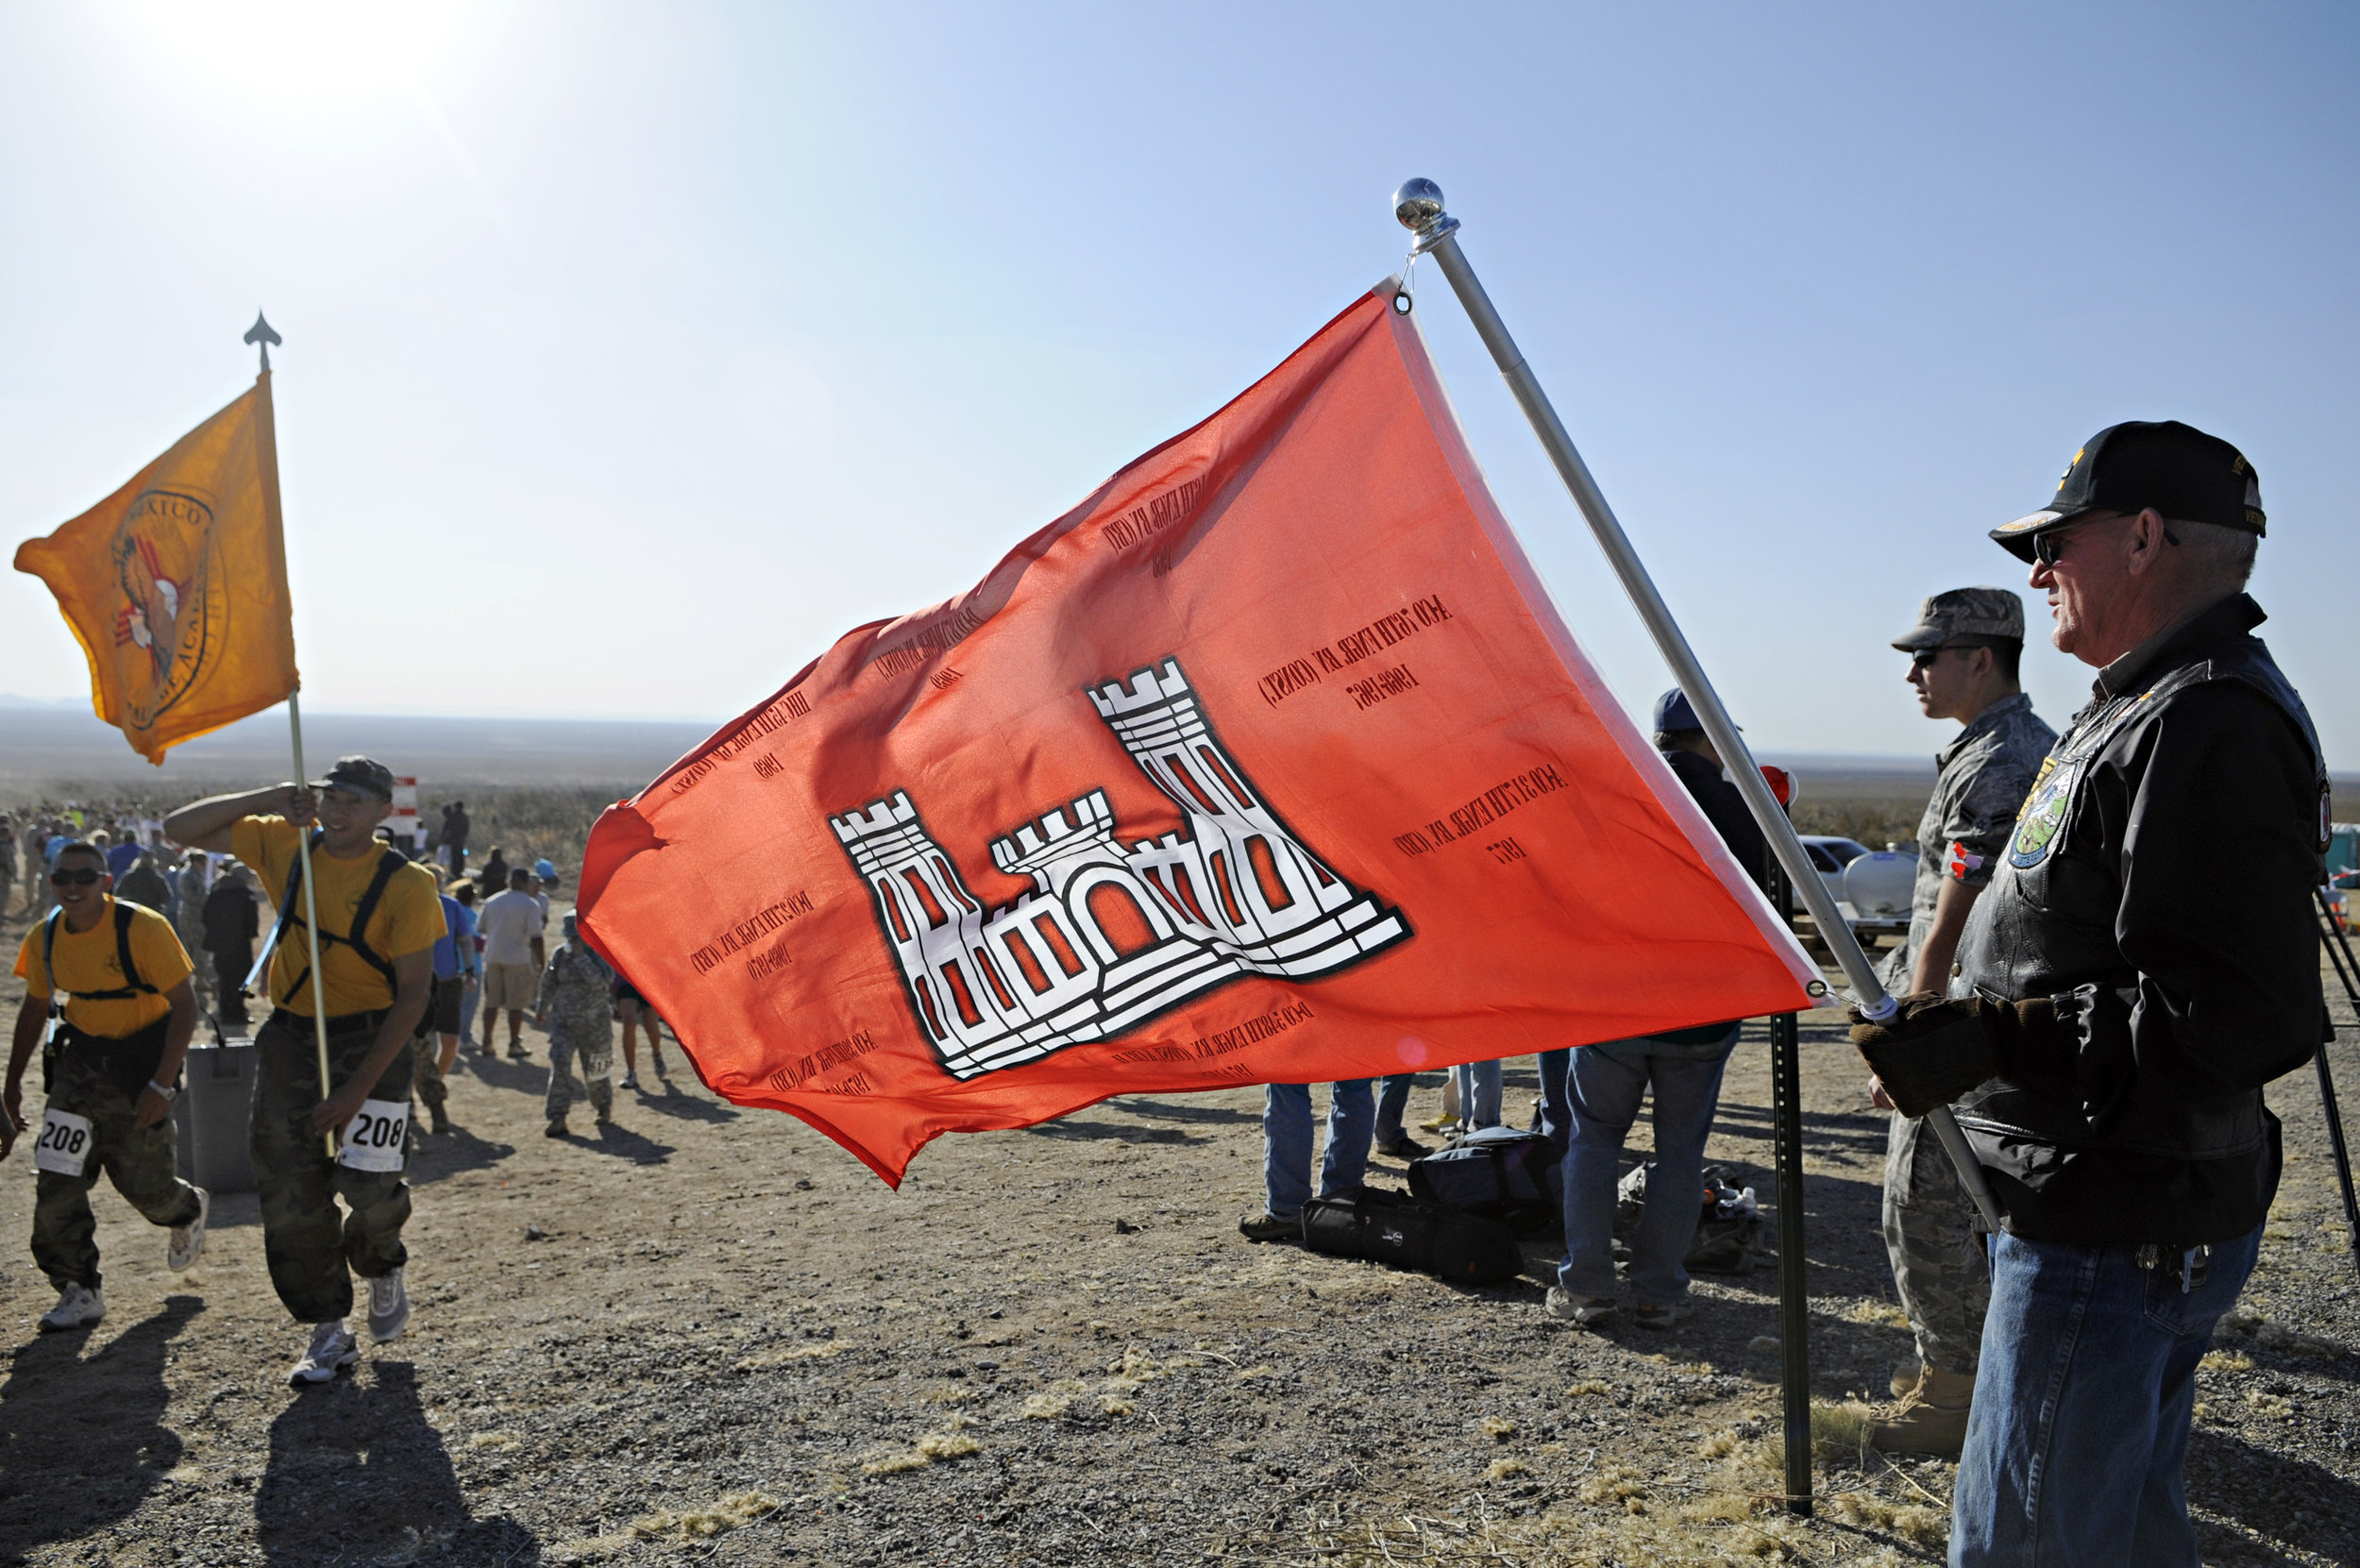  Vietnam veteran Bruce Fonnest, at right, holds up the Engineer flag as walkers and runners pass by at water station 3 during the 22nd Annual Bataan Memorial Death March at White Sands Missile Range, Sunday, March 27, 2011. (Morgan Petroski/Albuquerq